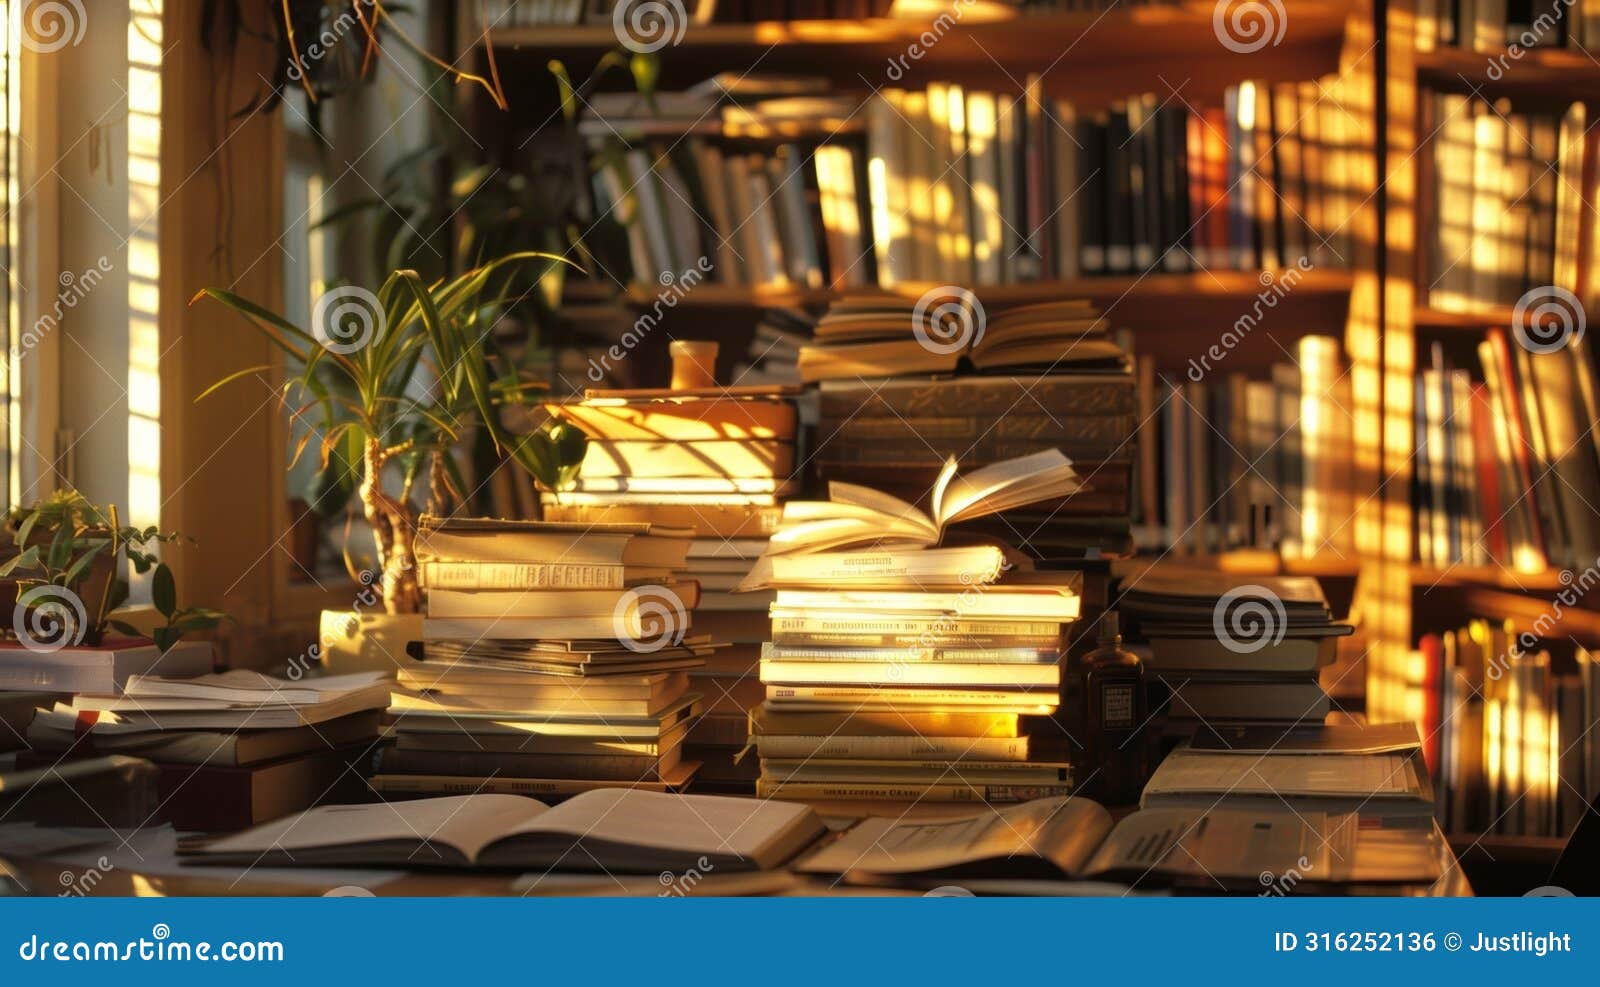 late afternoon shadows dancing playfully on the haphazard stacks of books and tered stationery atop the desk of a